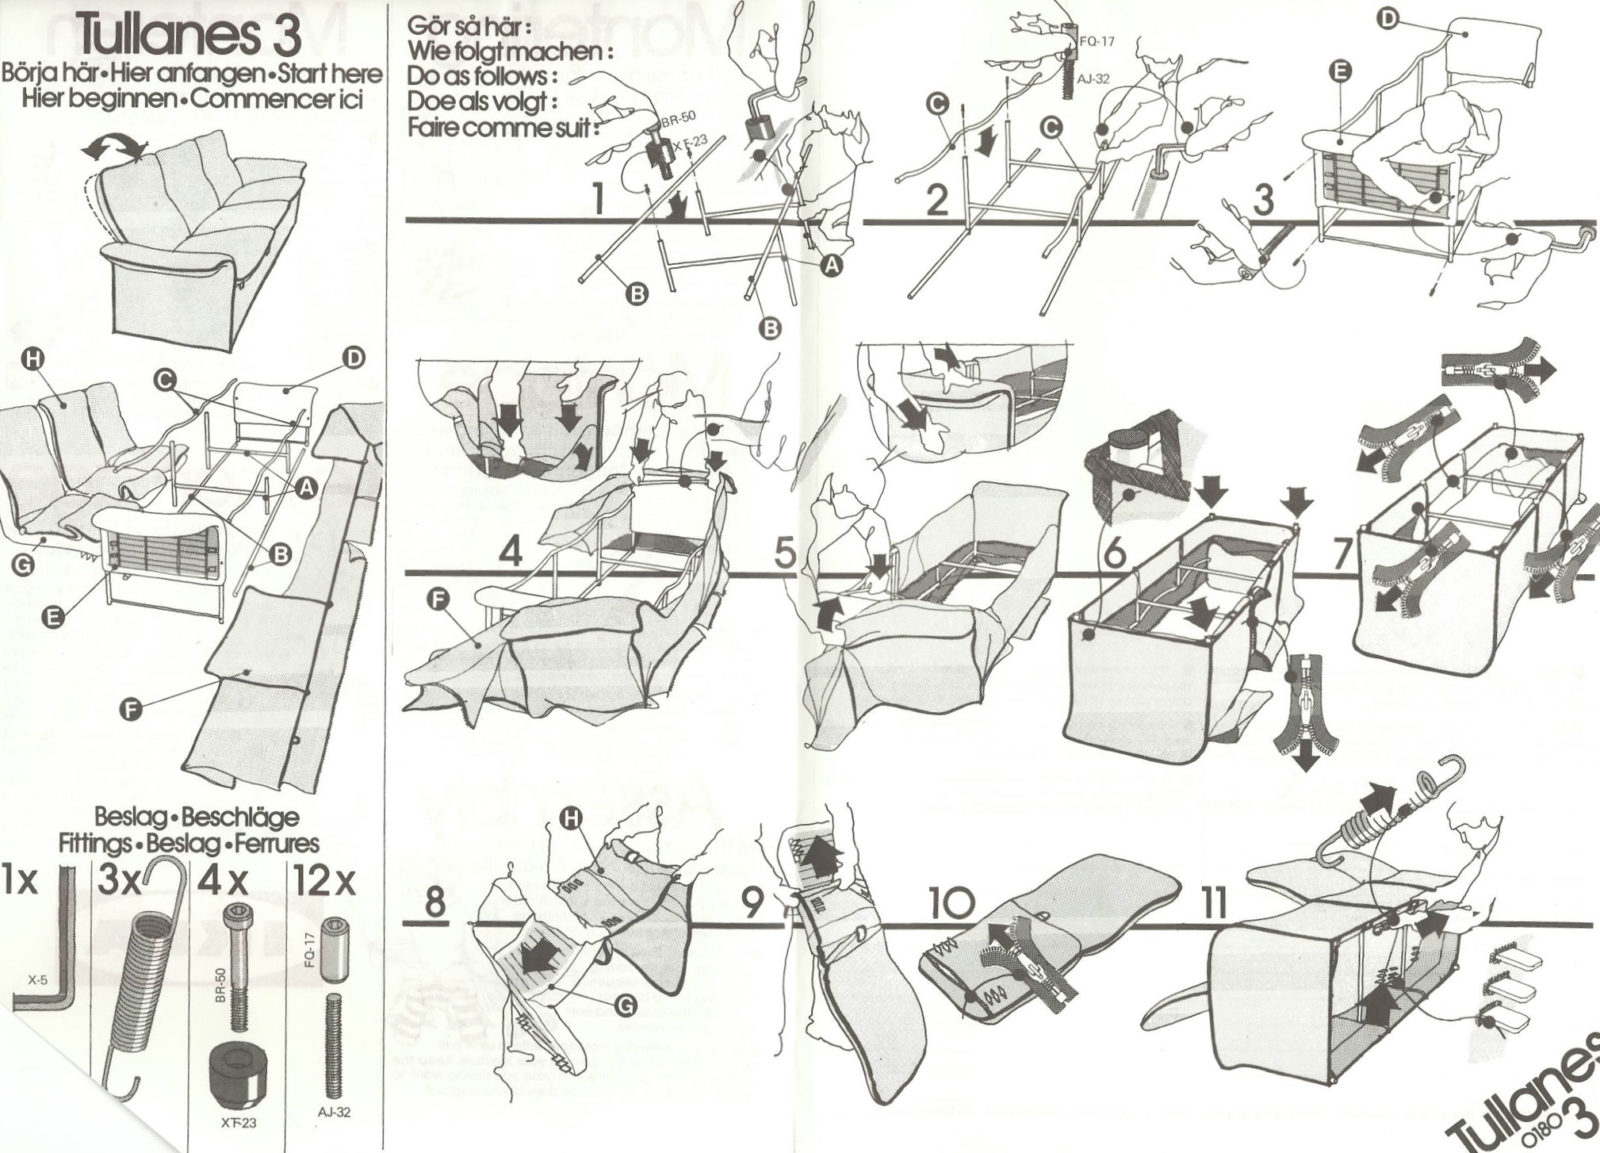 Complicated and difficult-to-understand assembly instructions from IKEA for the TULLANÄS armchair.